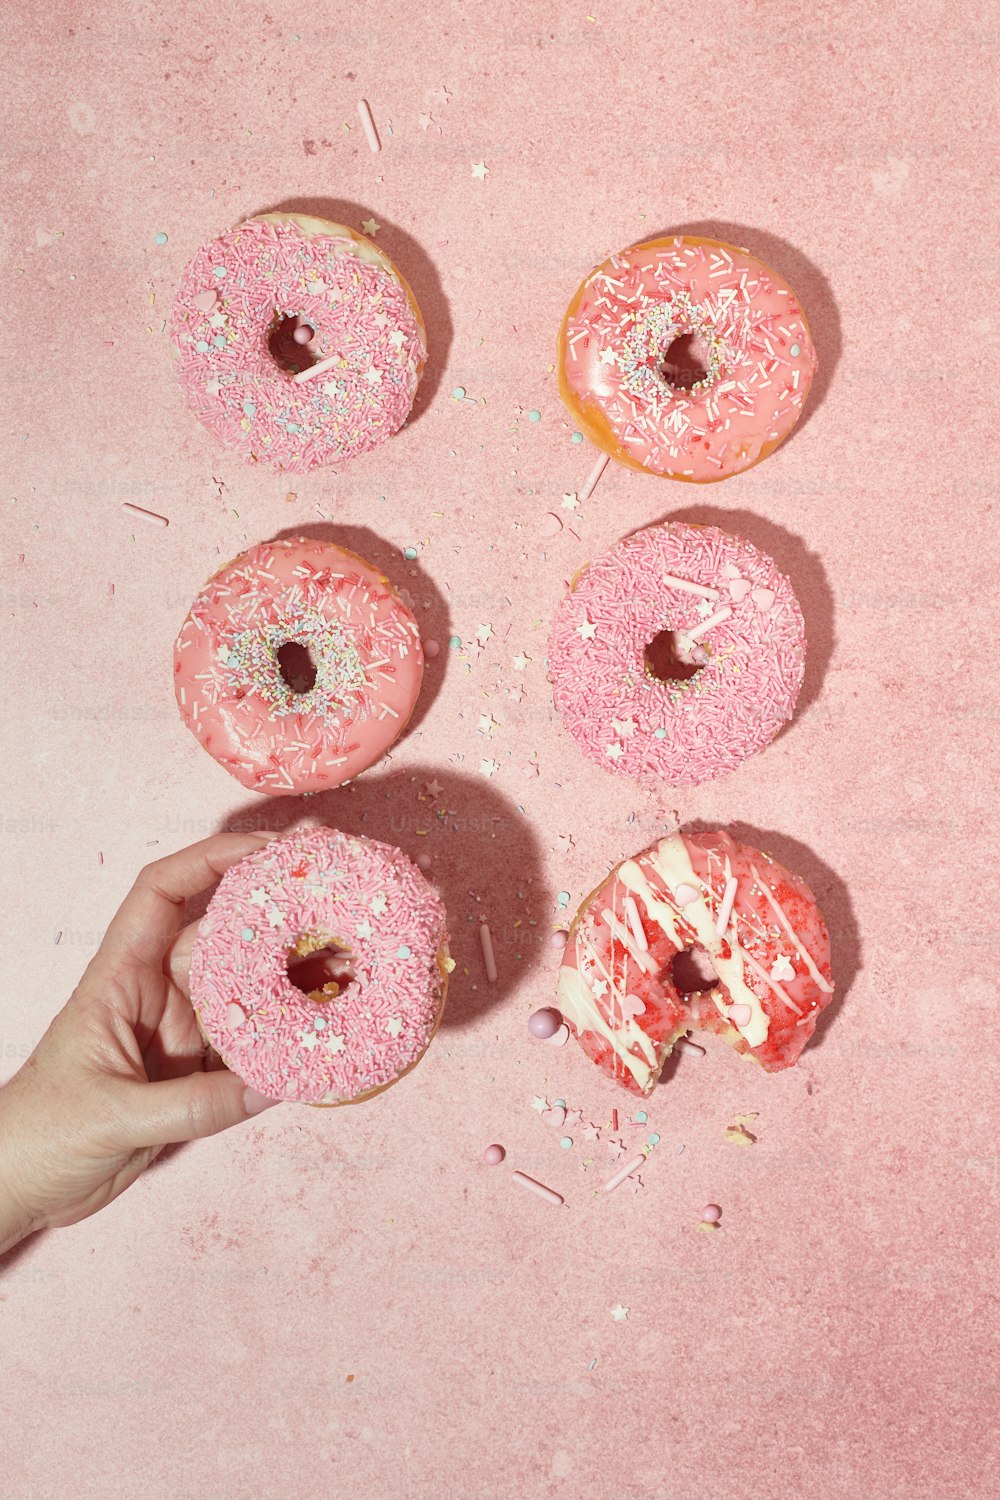 a person holding a doughnut with sprinkles on it